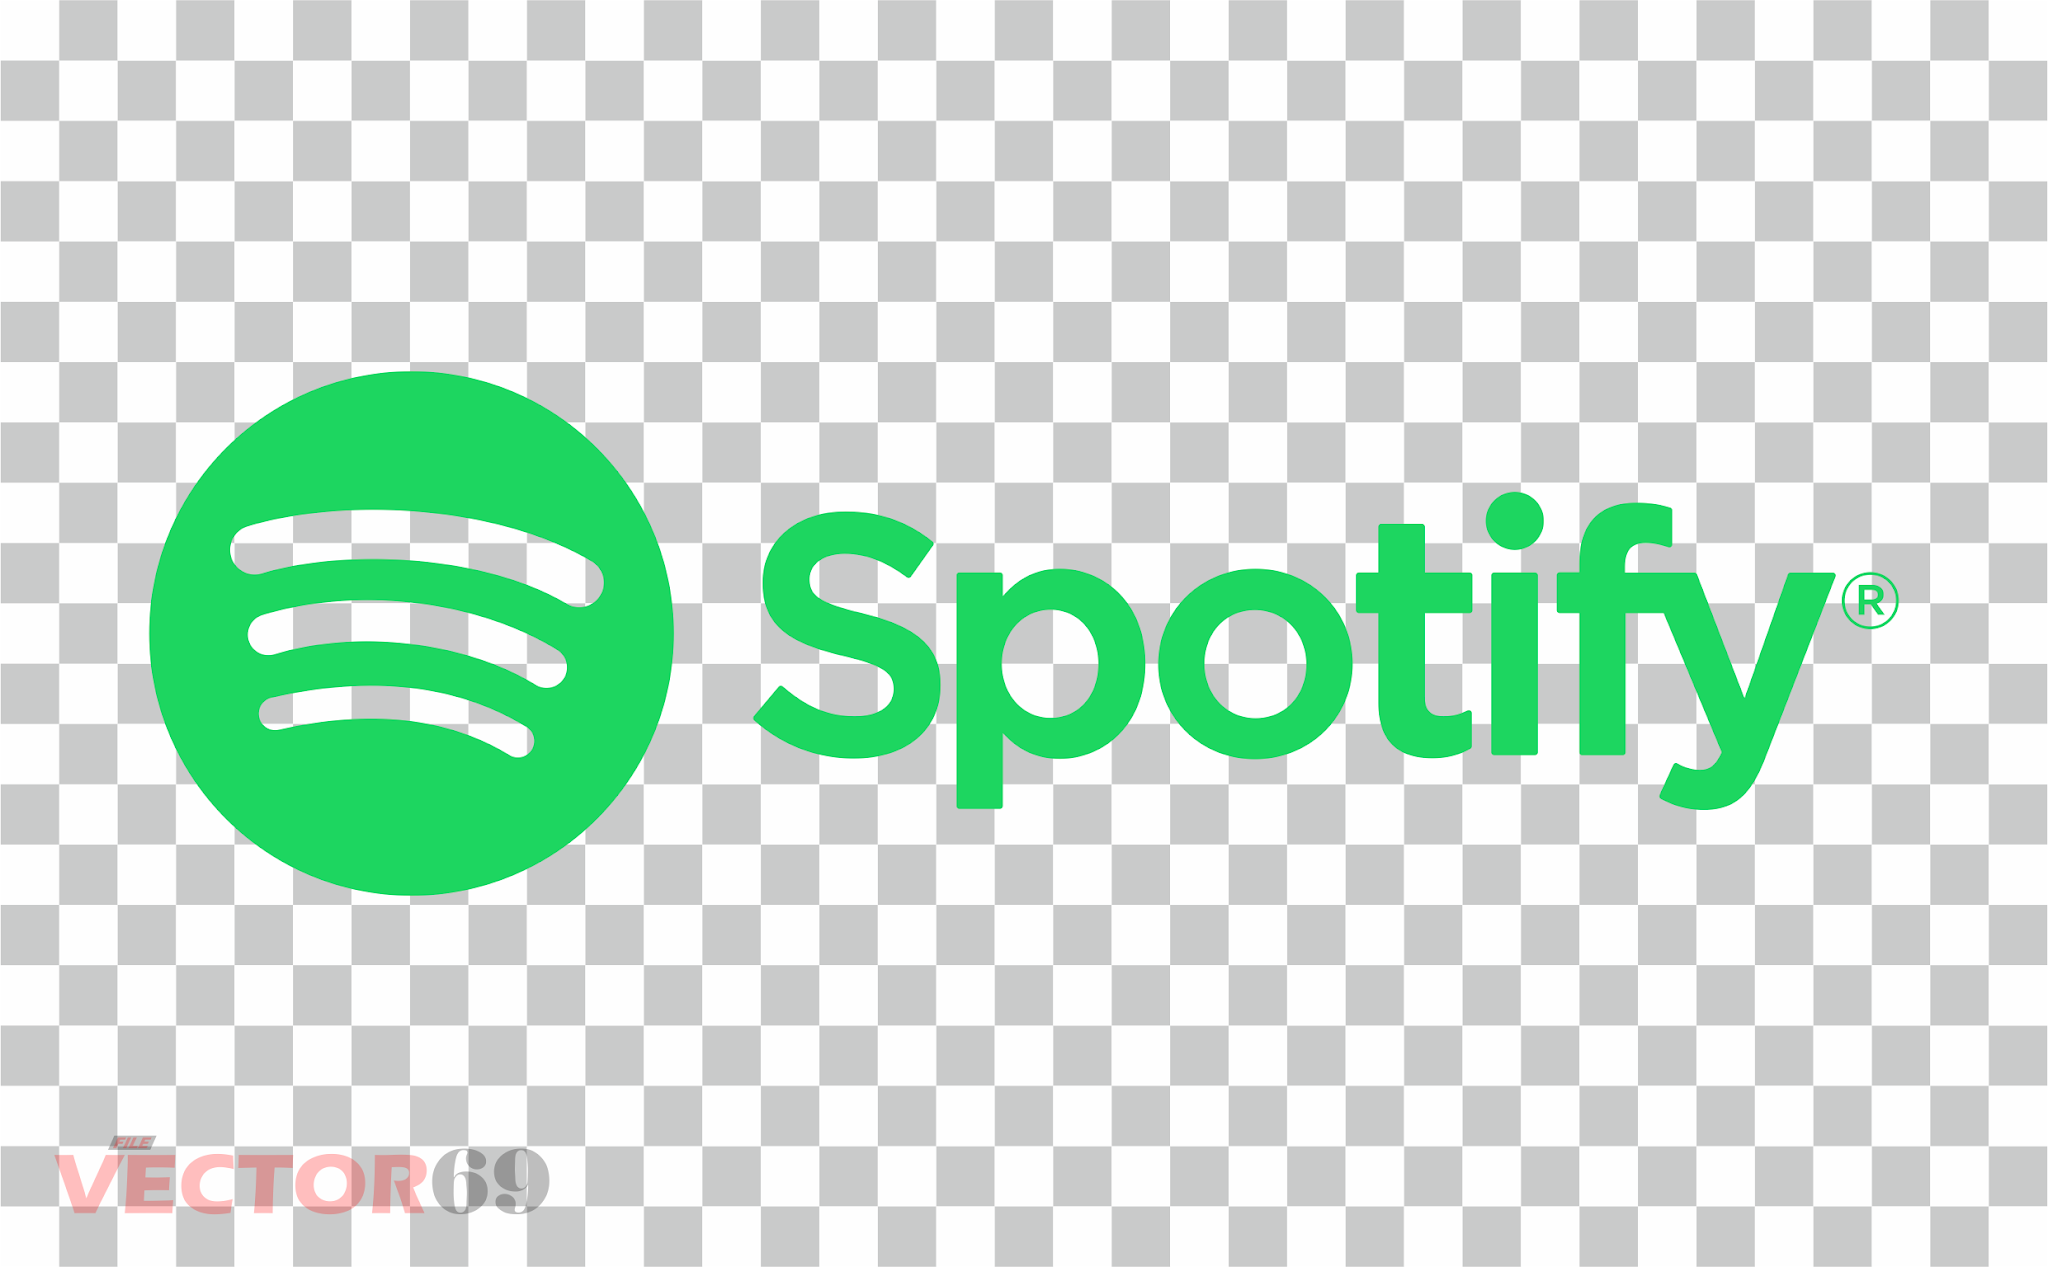 Spotify Logo - Download Vector File PNG (Portable Network Graphics)